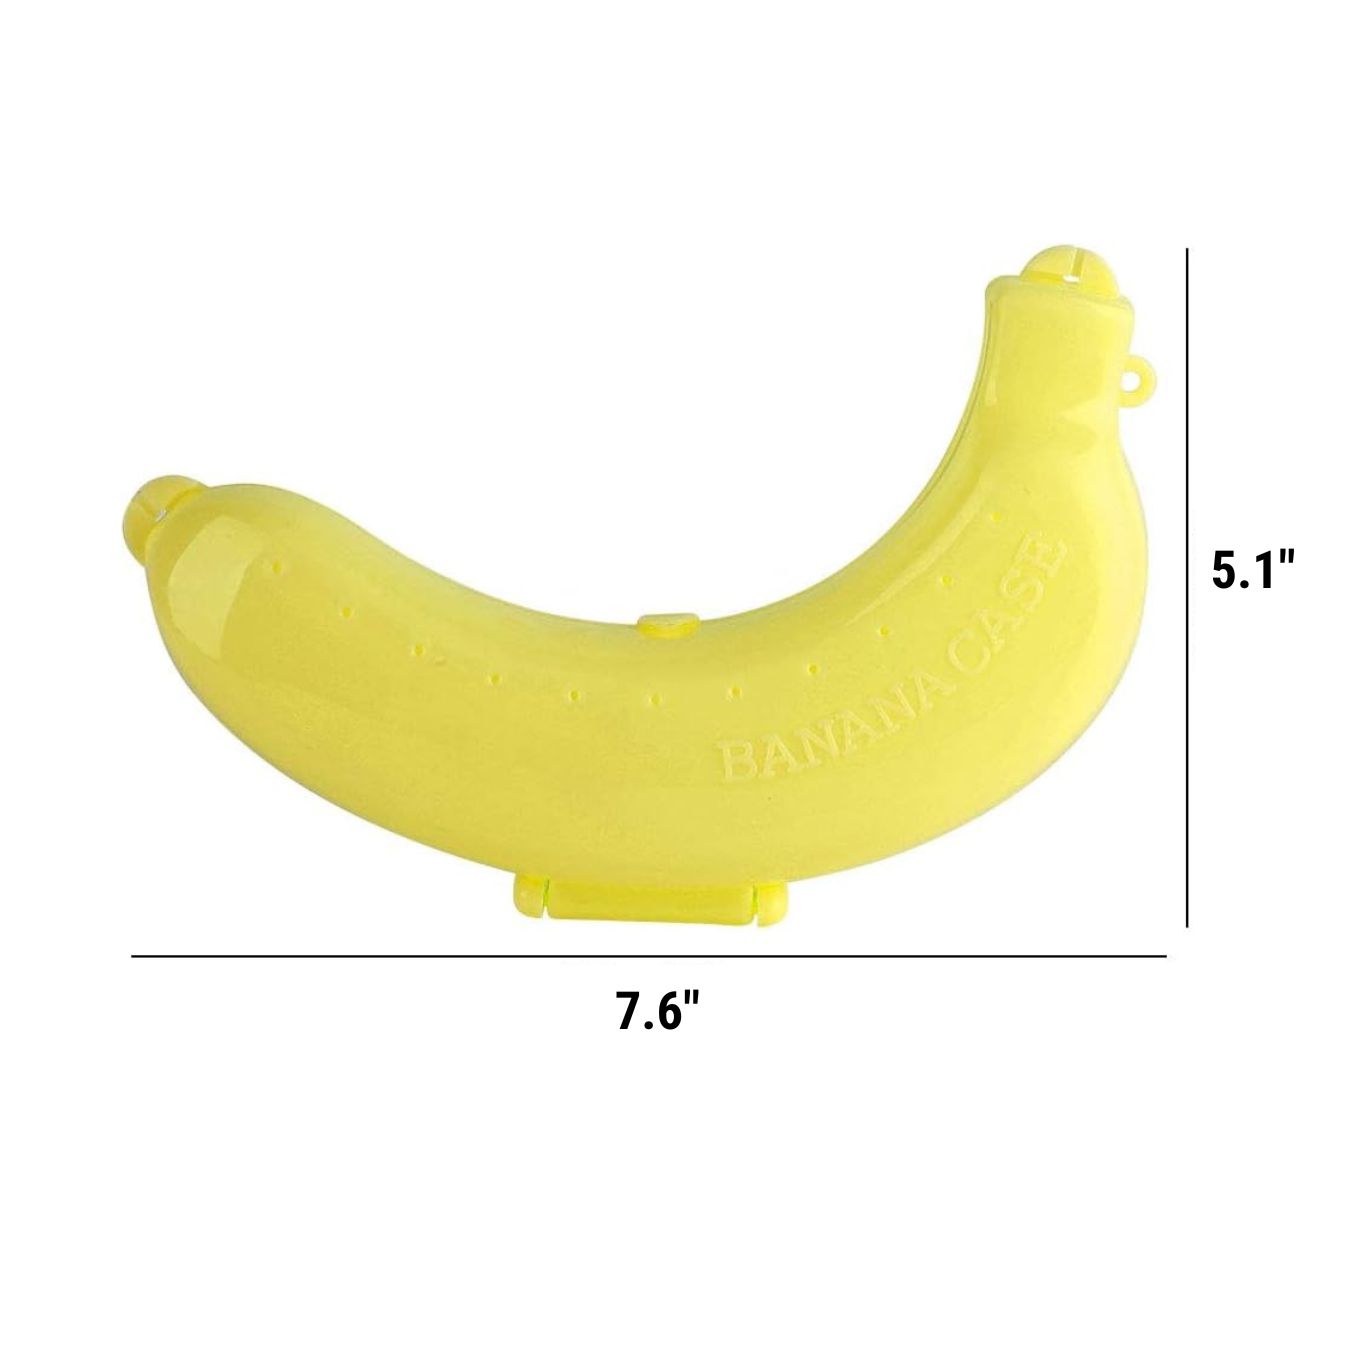 Is That a Banana in Your Pocket? Banana Holder Case